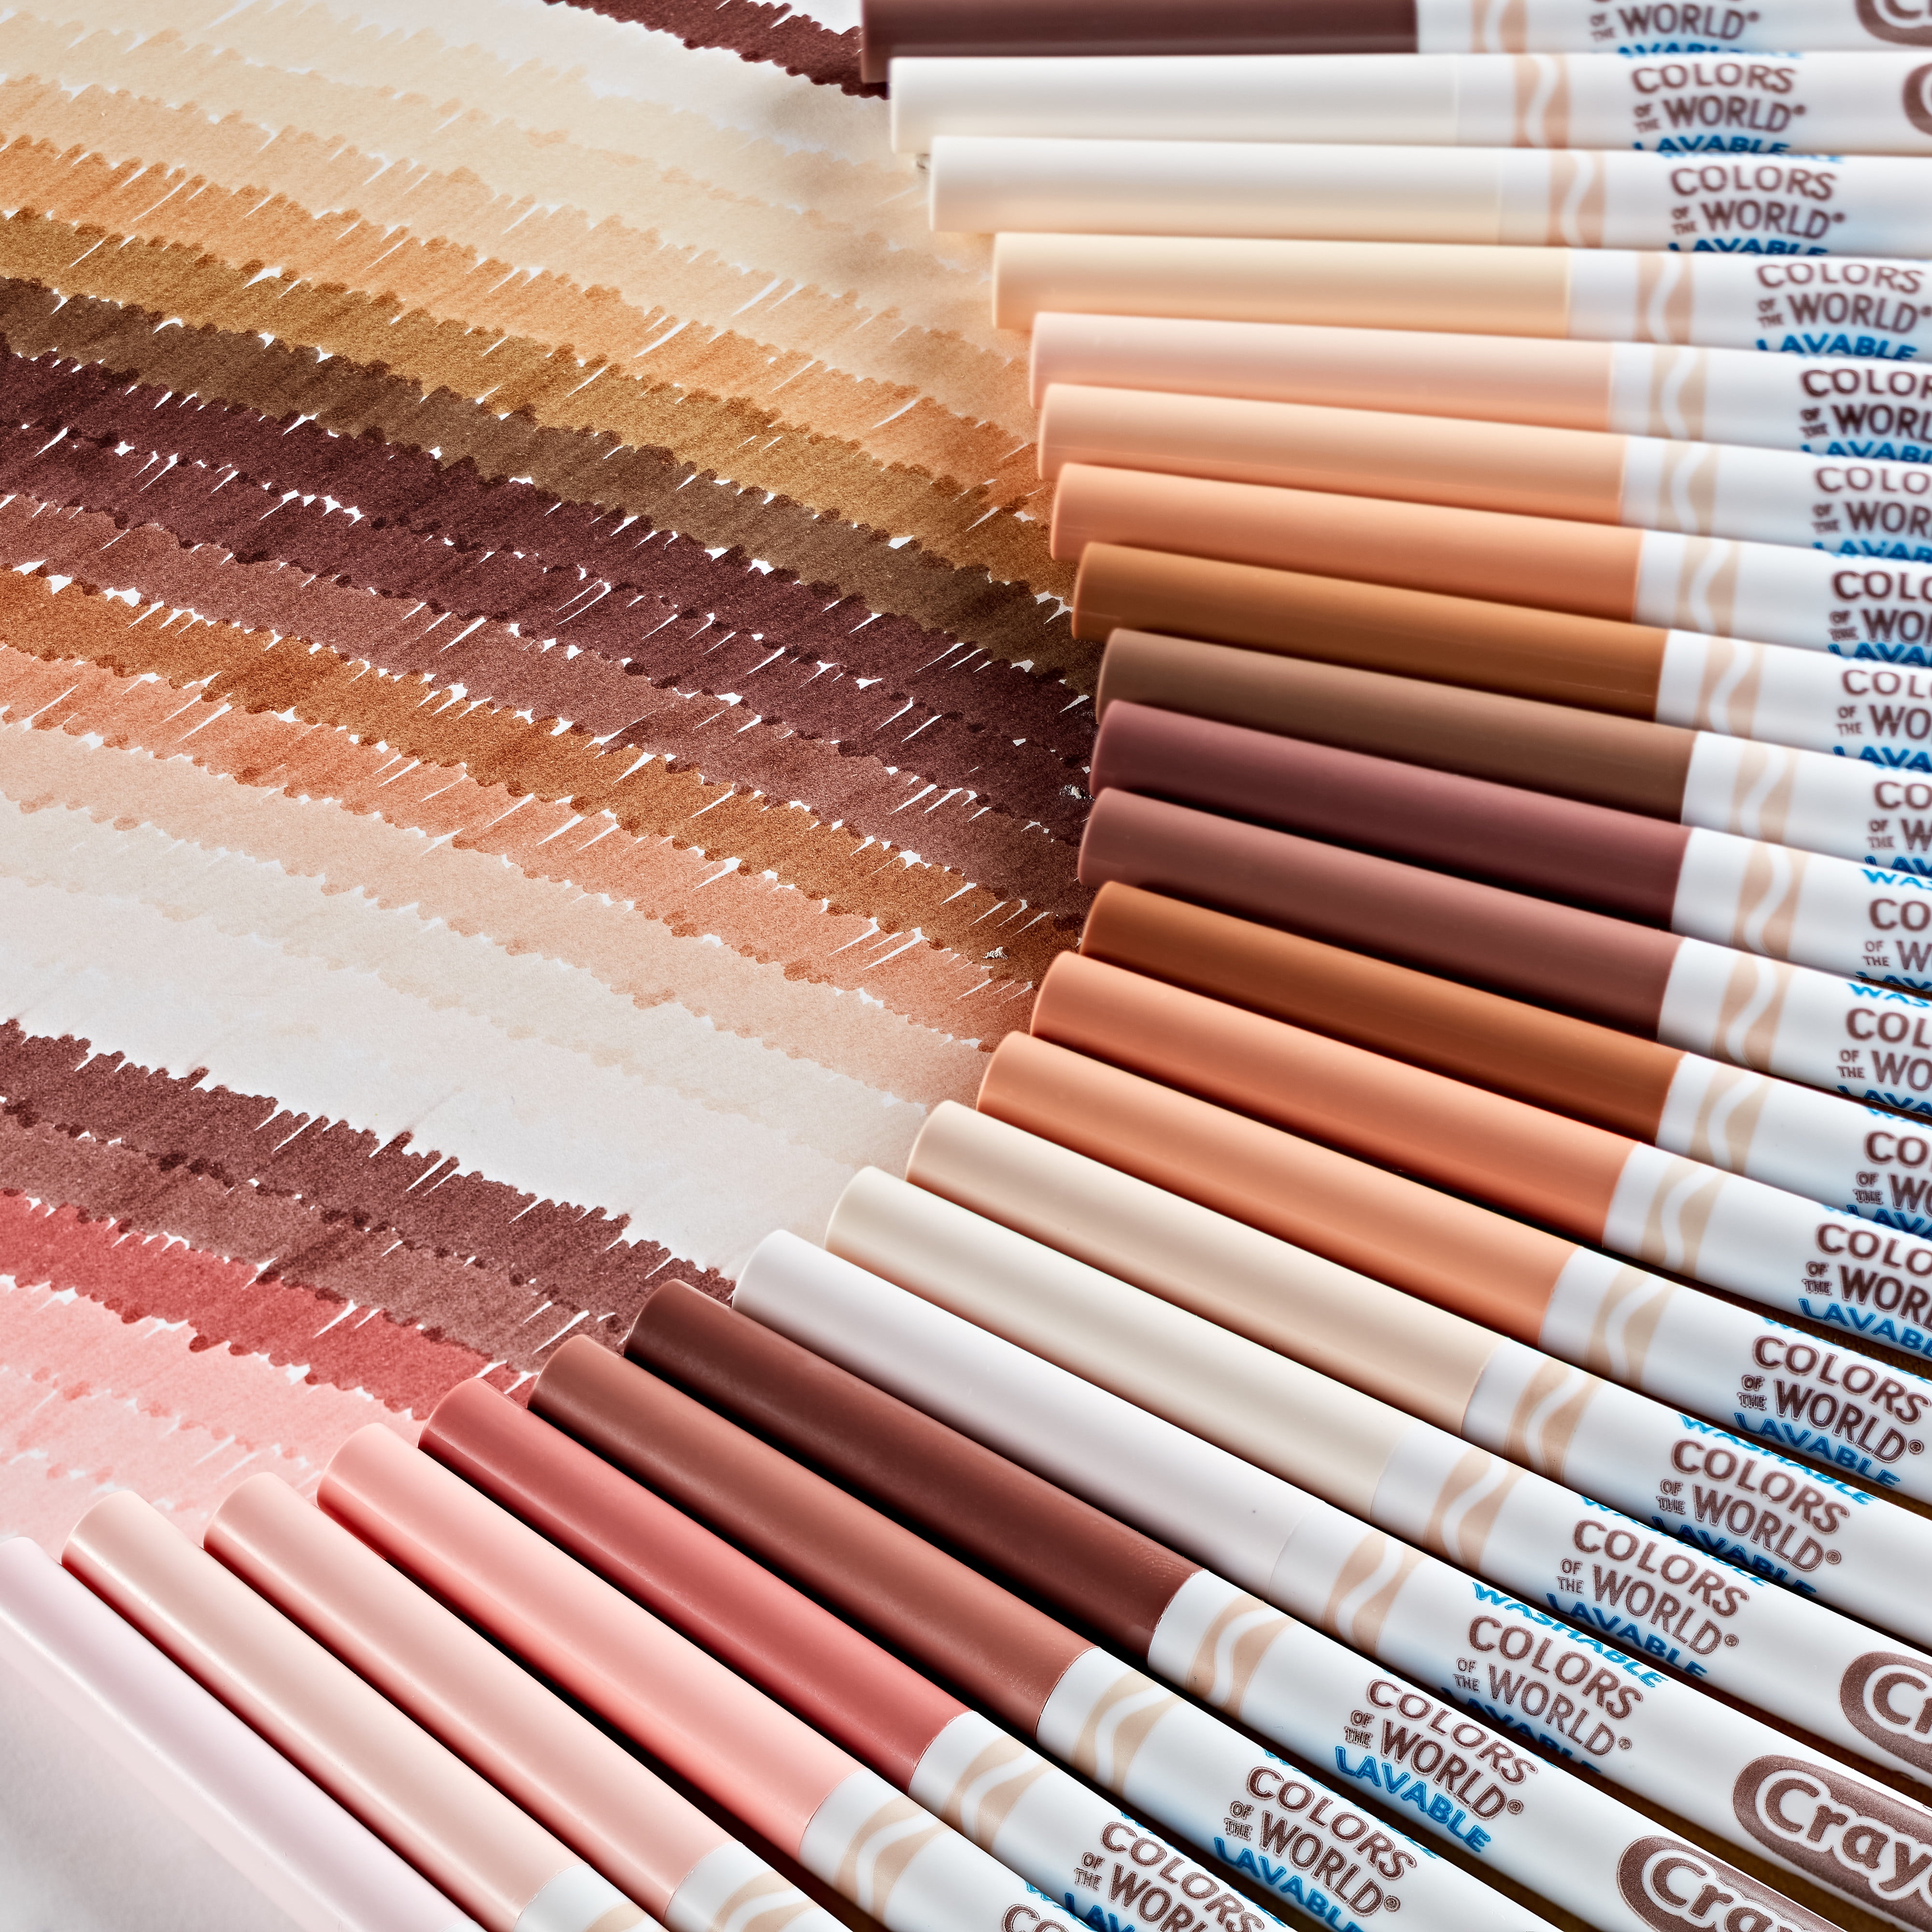 RECAP — Some good news and why is Crayola adding more skin tones